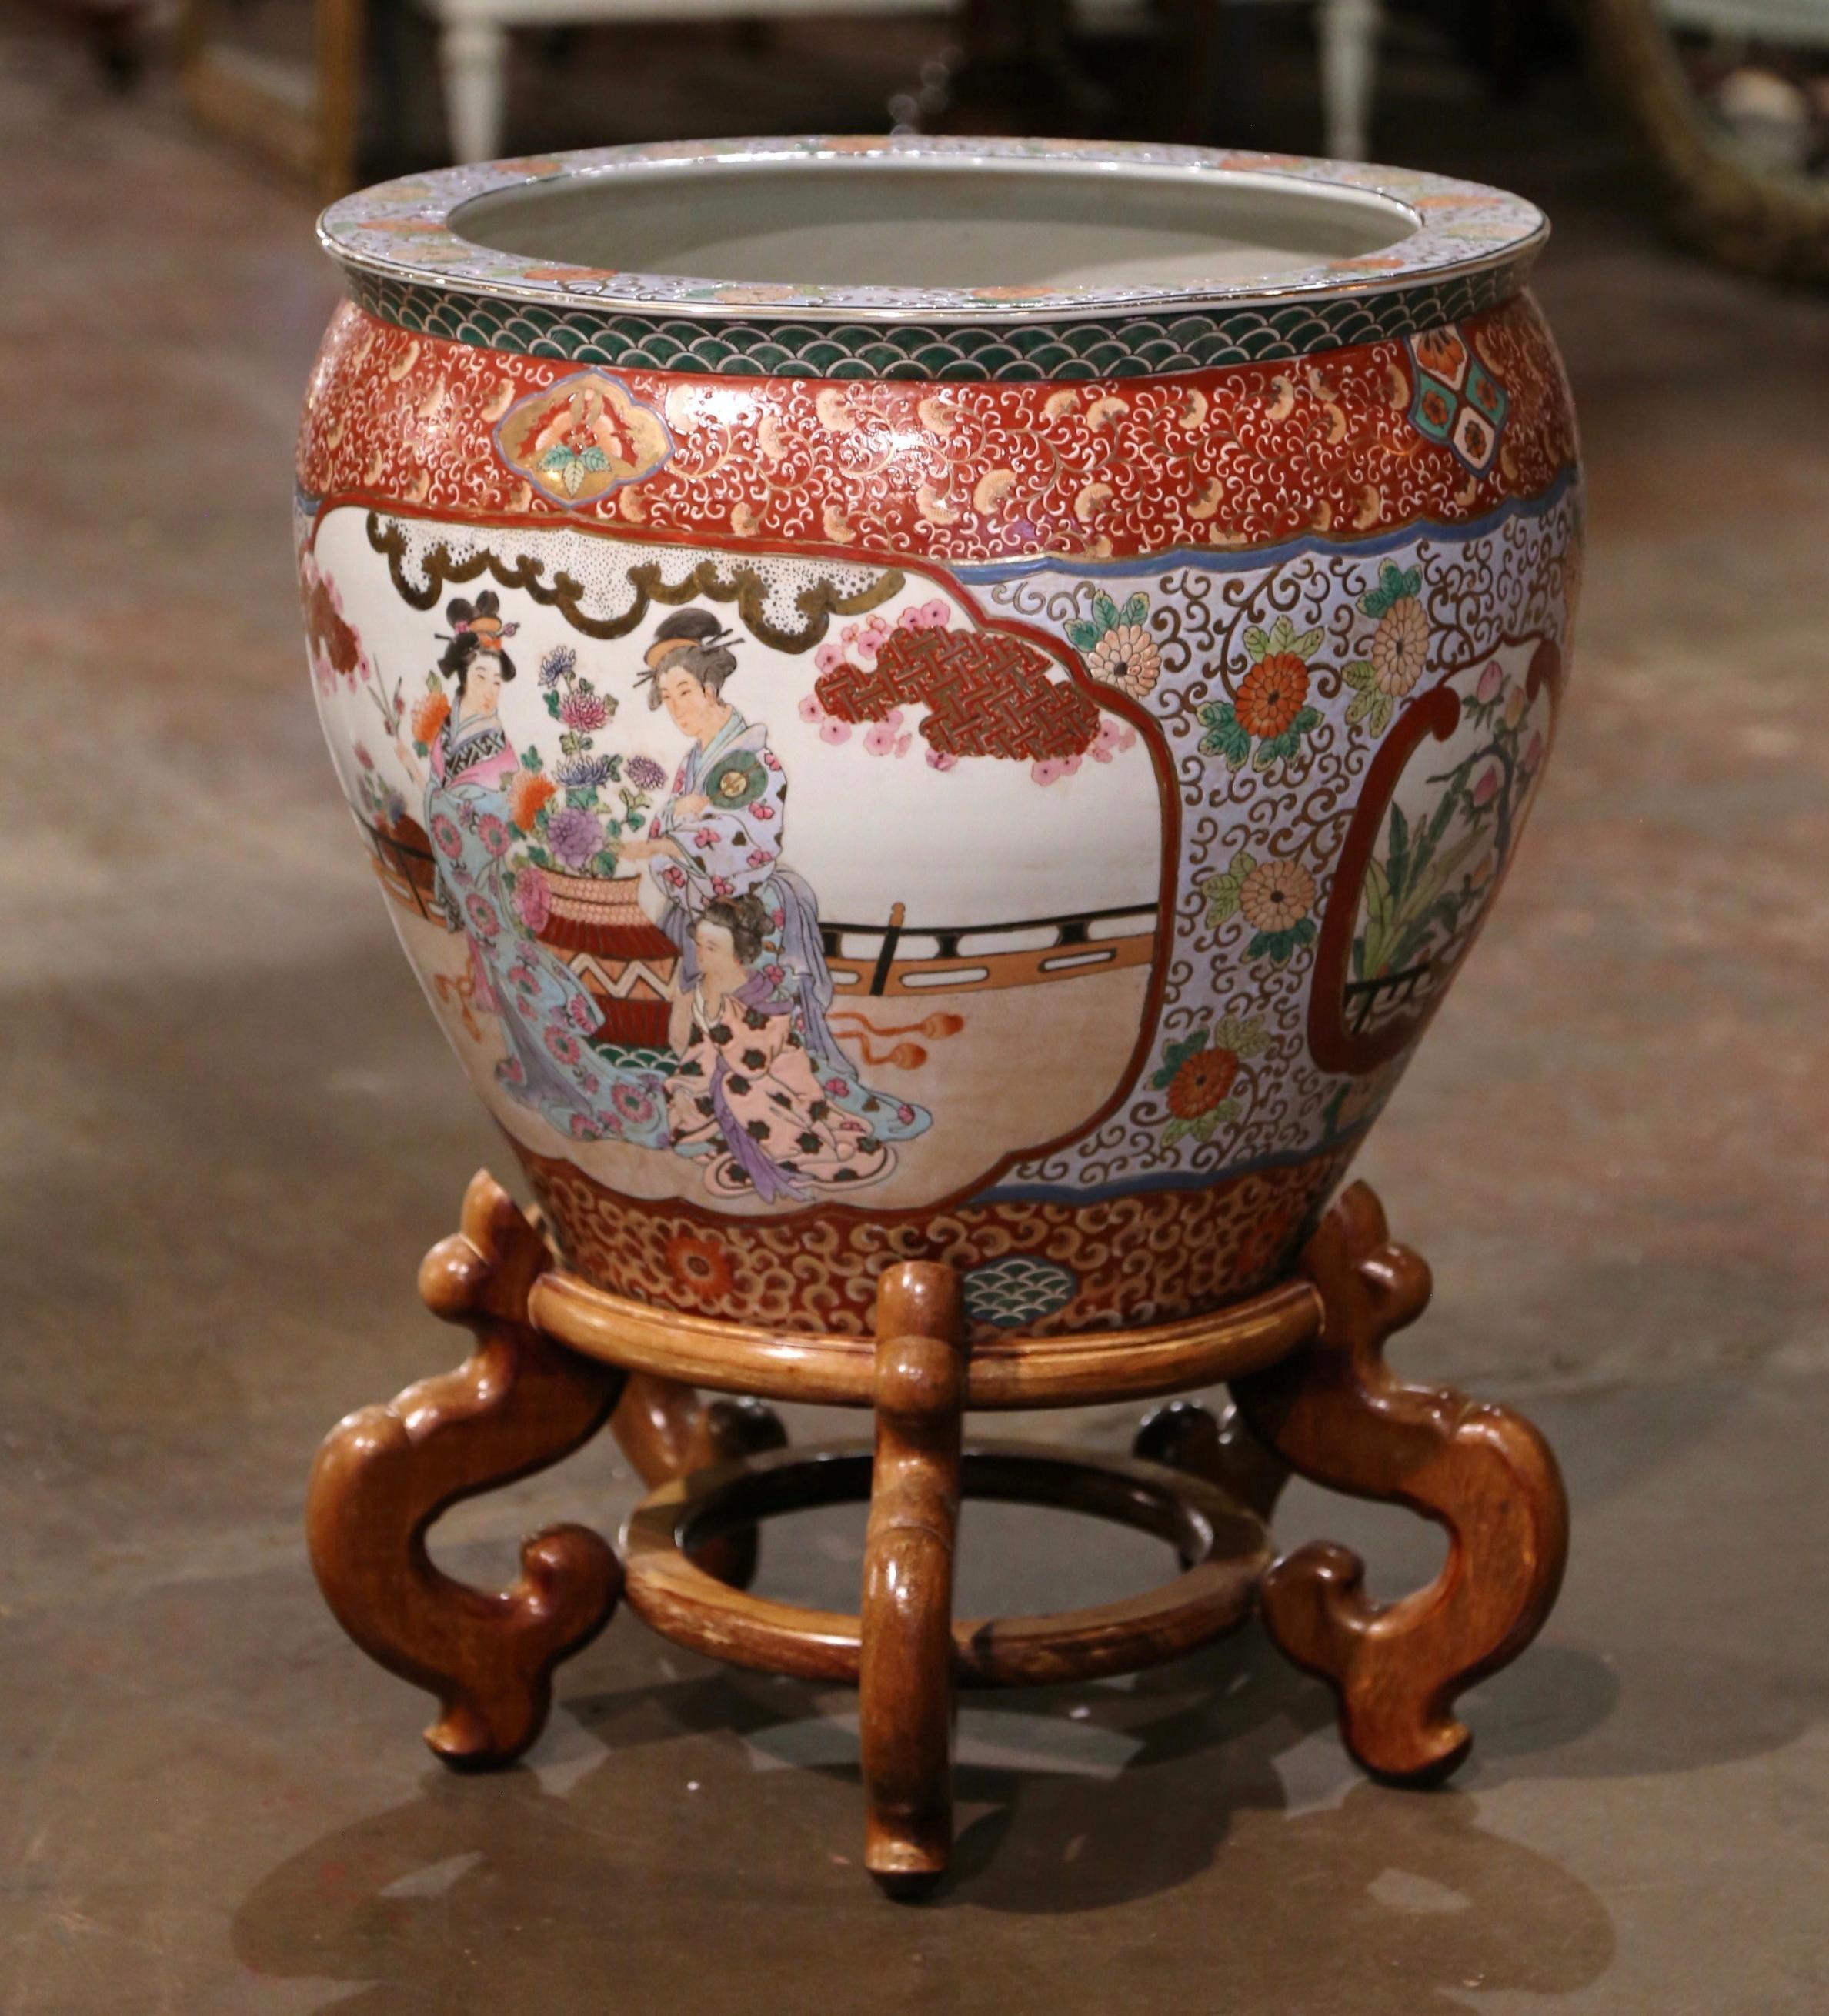 20th Century Mid-Century Chinese Export Painted Porcelain Fish Bowl on Carved Walnut Stand